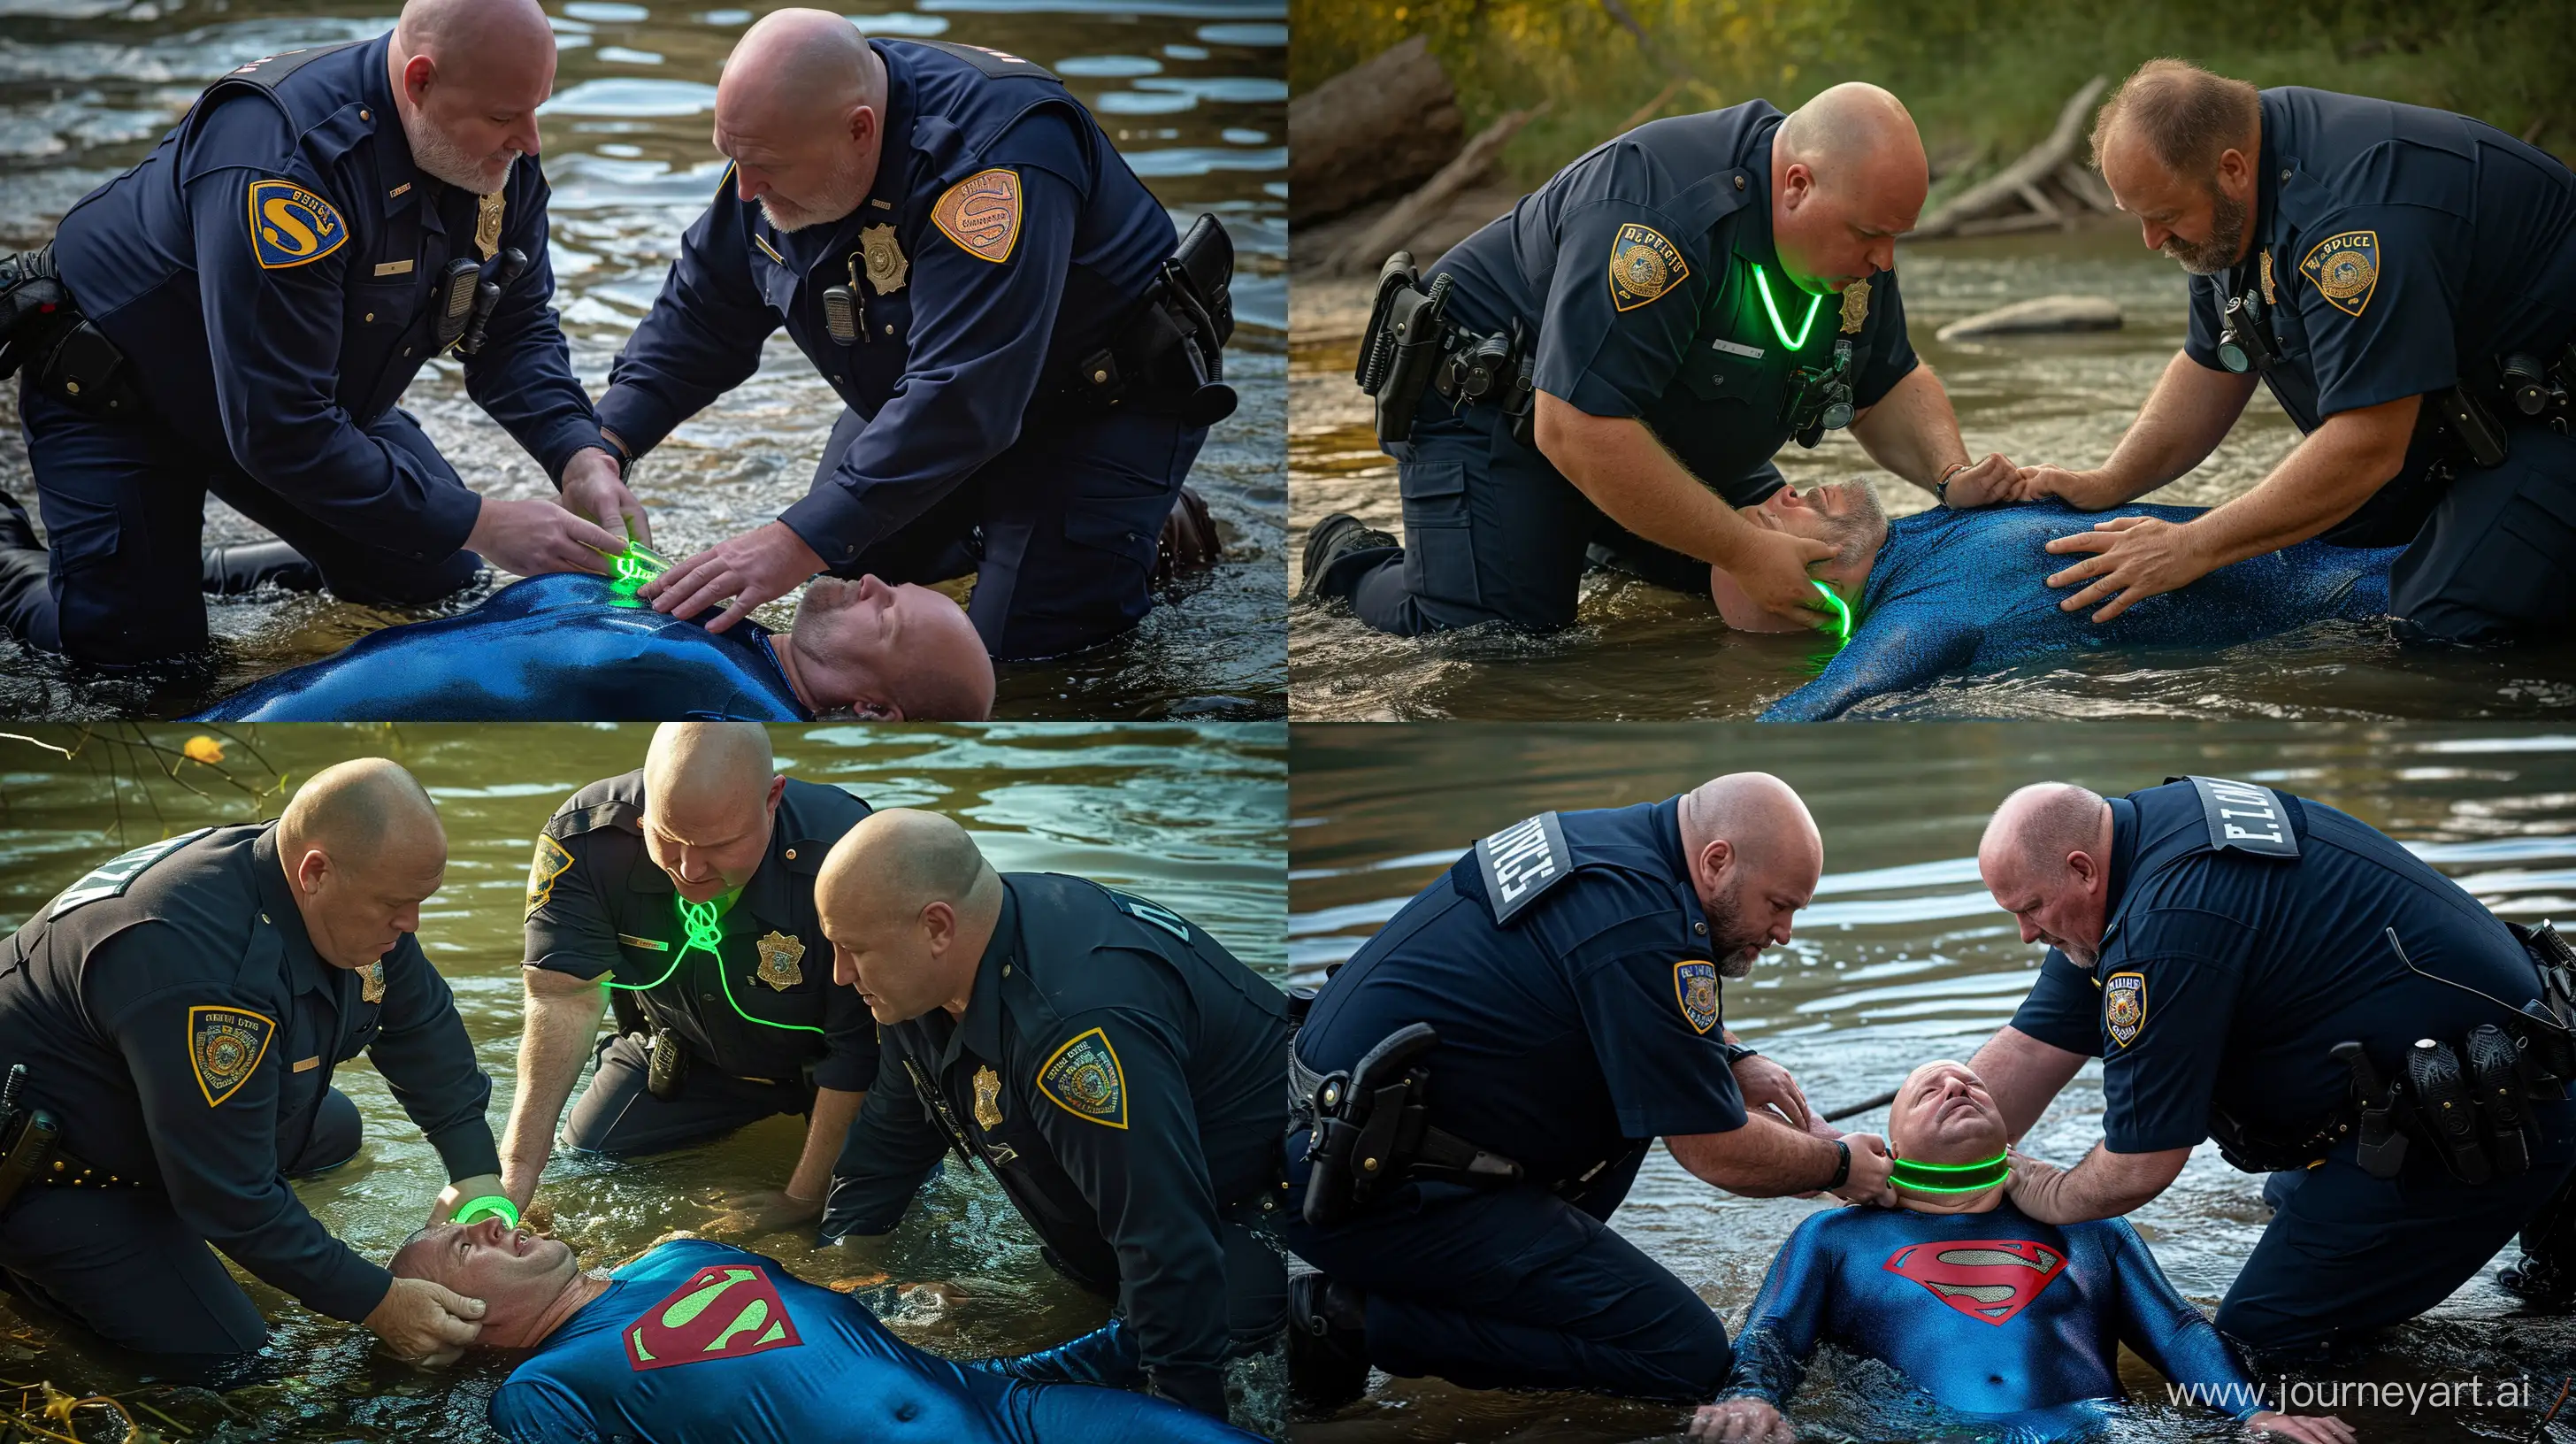 Senior-Police-Officers-Securely-Fastening-Glowing-Dog-Collar-on-WaterSubmerged-Superman